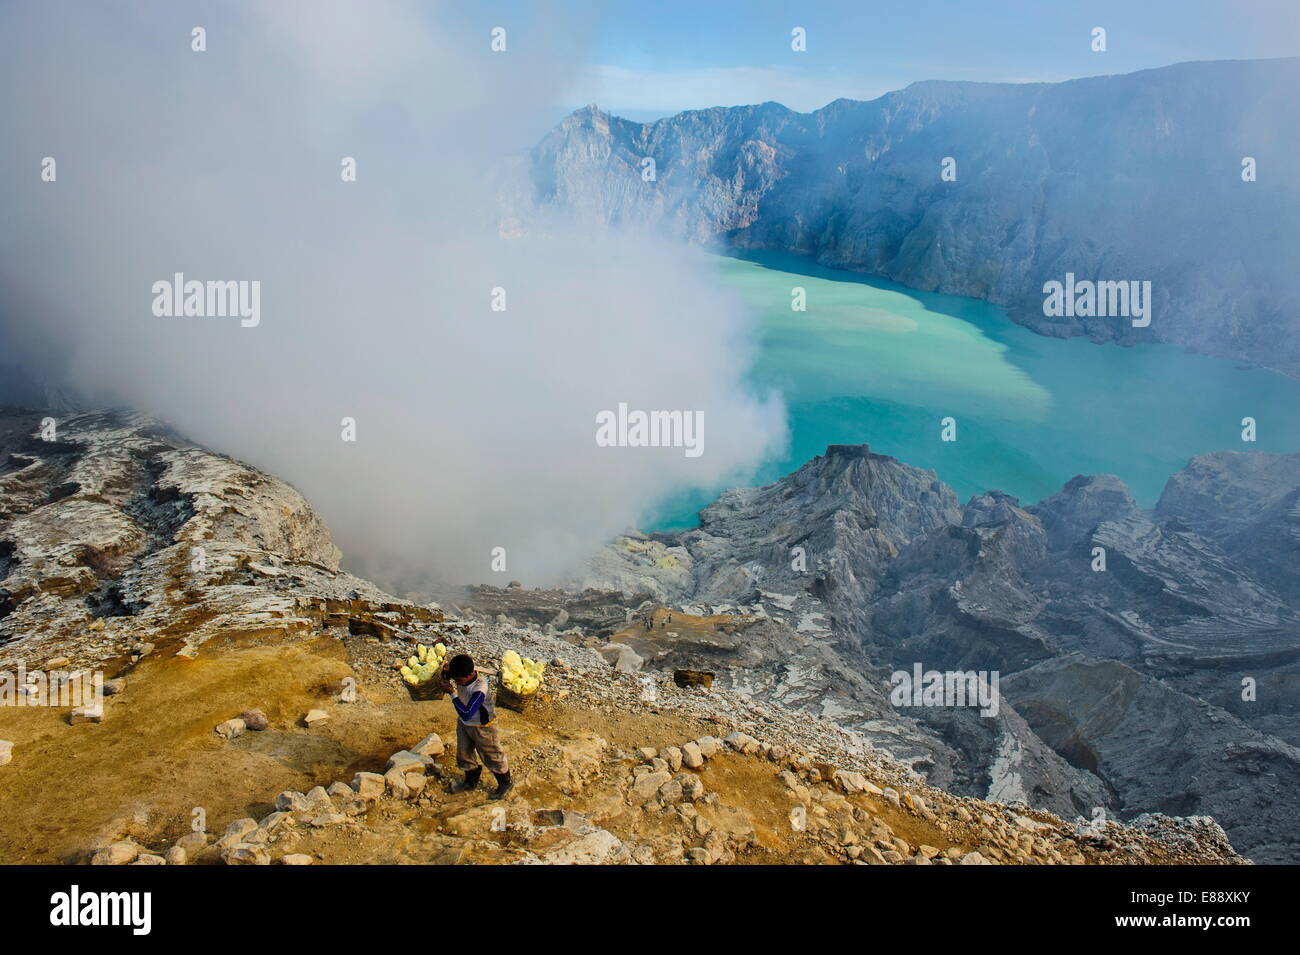 Worker loaded with big pieces of sulphur in front of steam clouds on the Ijen crater lake, Java, Indonesia, Southeast Asia, Asia Stock Photo